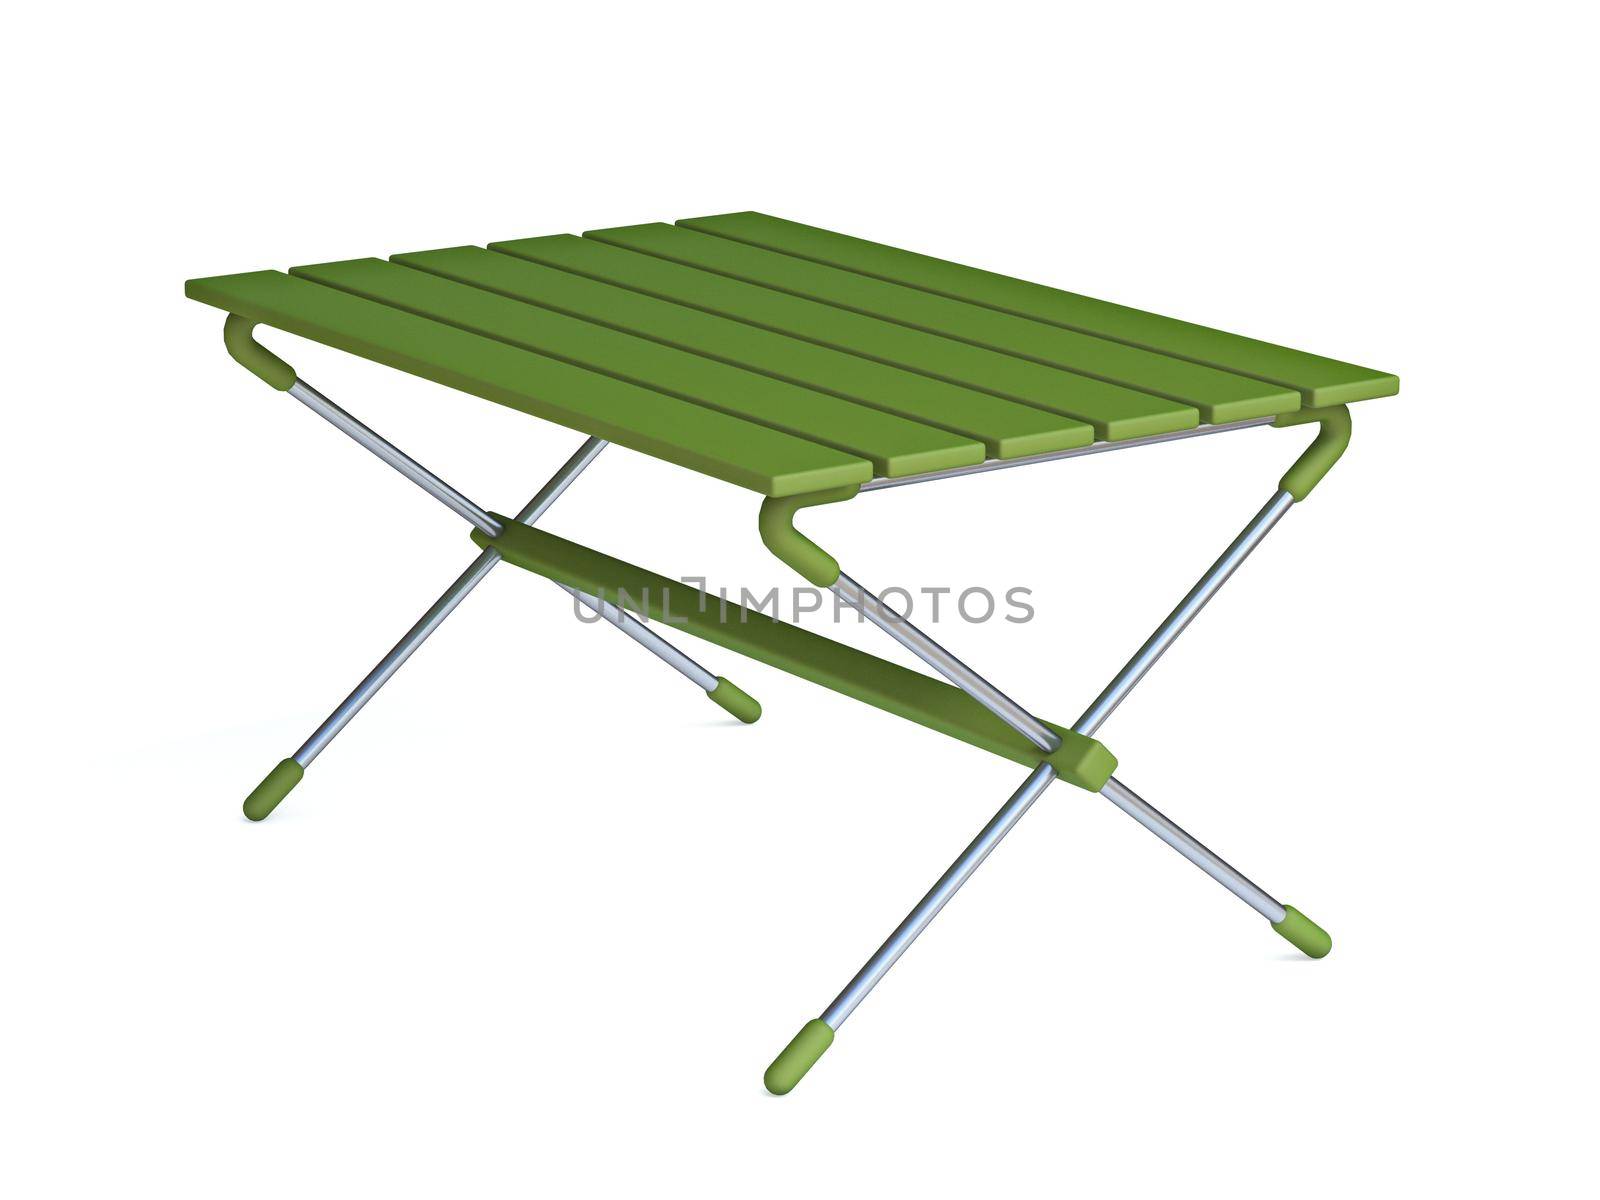 Green camping table 3D render illustration isolated on white background